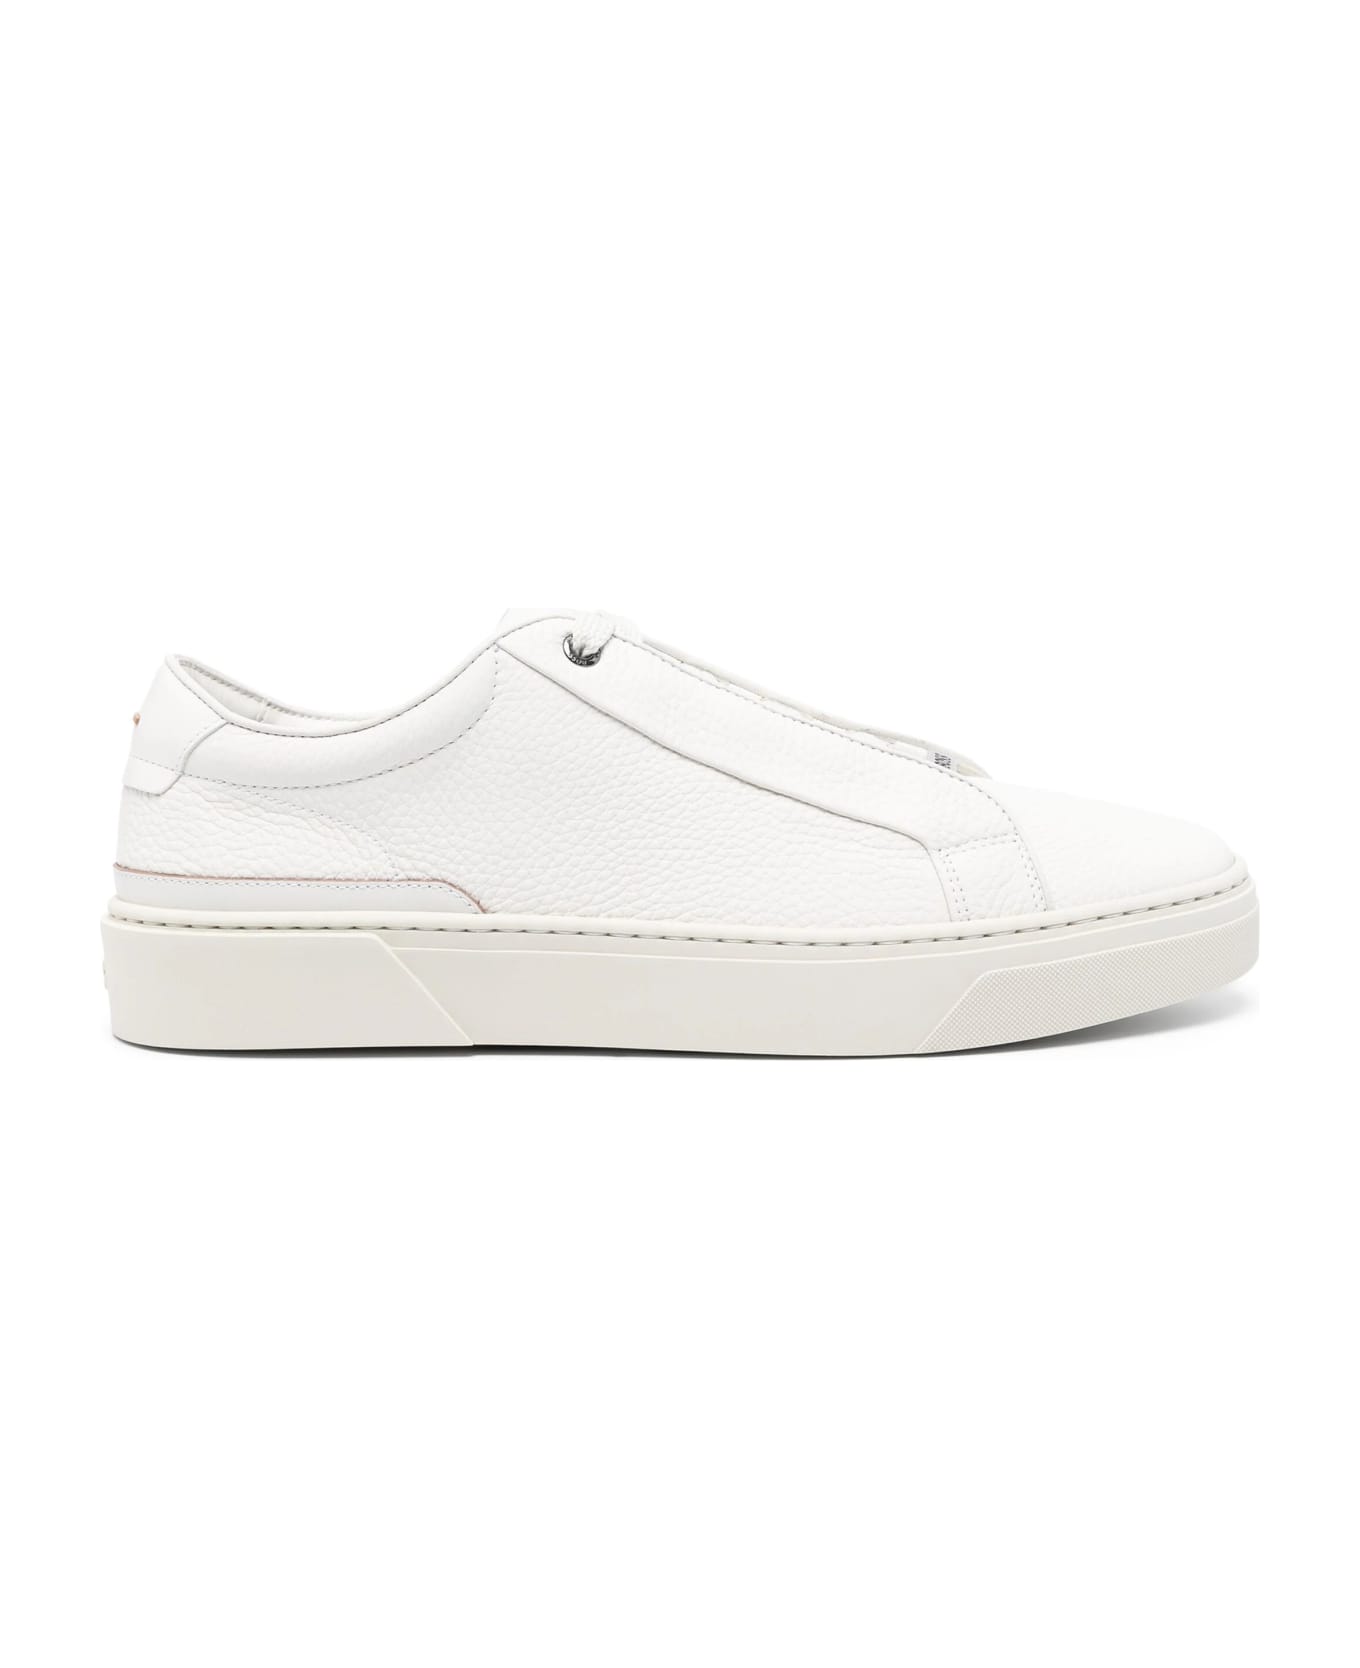 Hugo Boss White Grained Leather Sneakers With Logo Tag On Laces - White